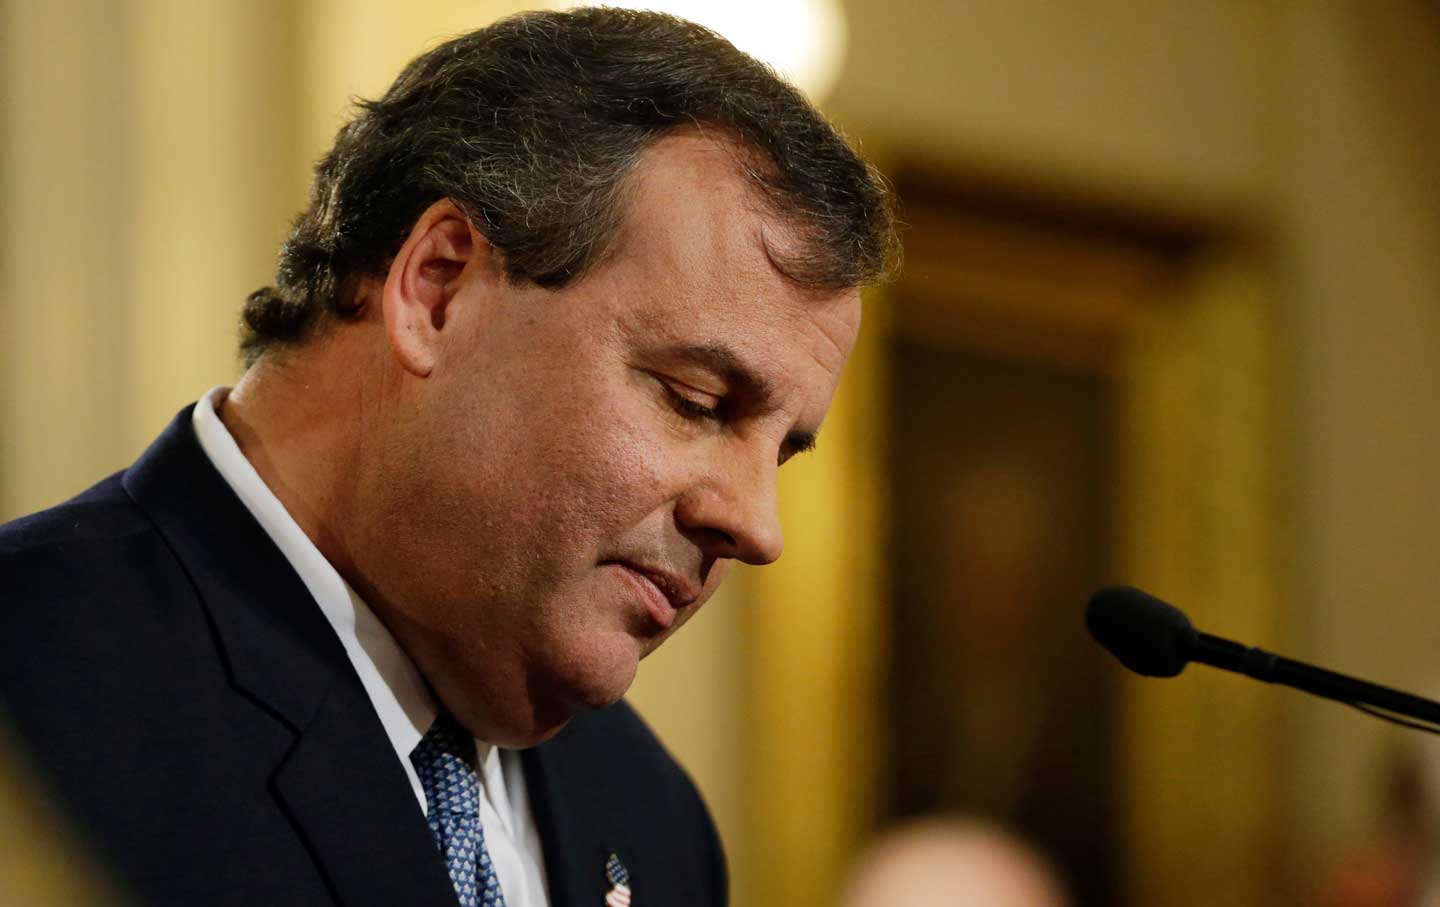 Christie Continues to Defend the ‘National Embarrassment’ Who Has ‘Humiliated’ the State of Maine